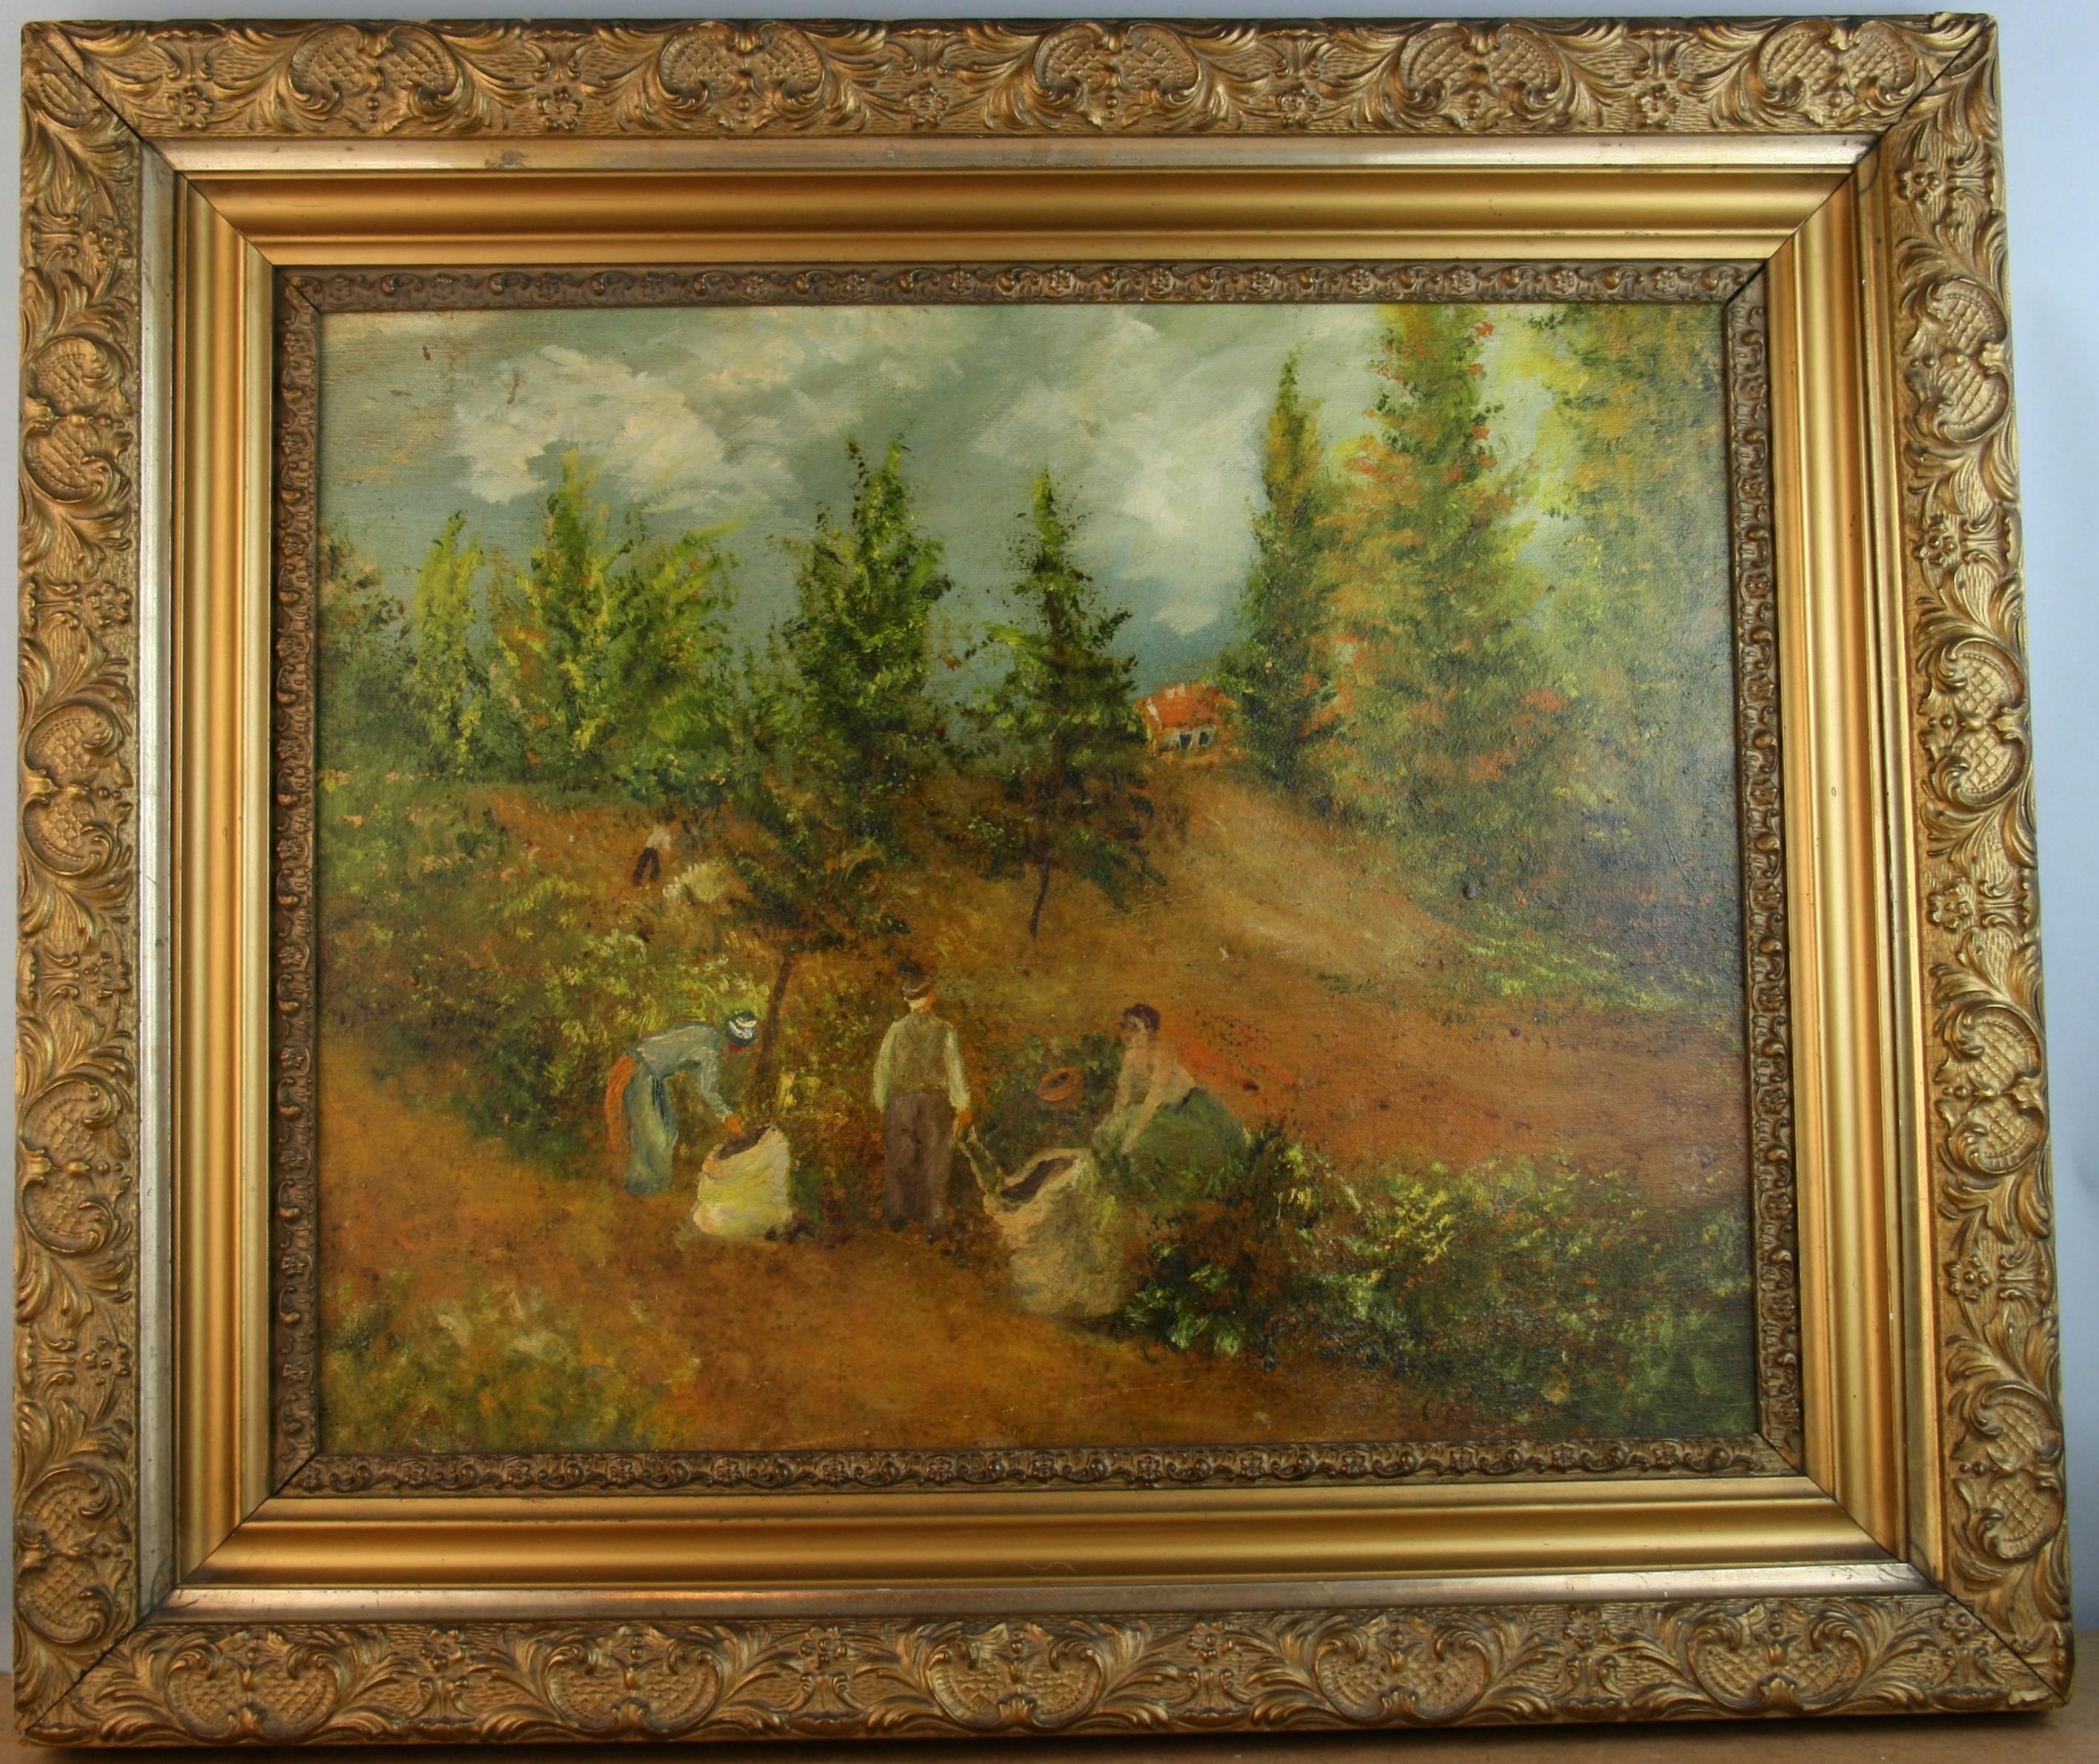 3910B  Antique oil landscape people working in a beau colic field .
Set in a 19th C gilt frame
Image size 16x20